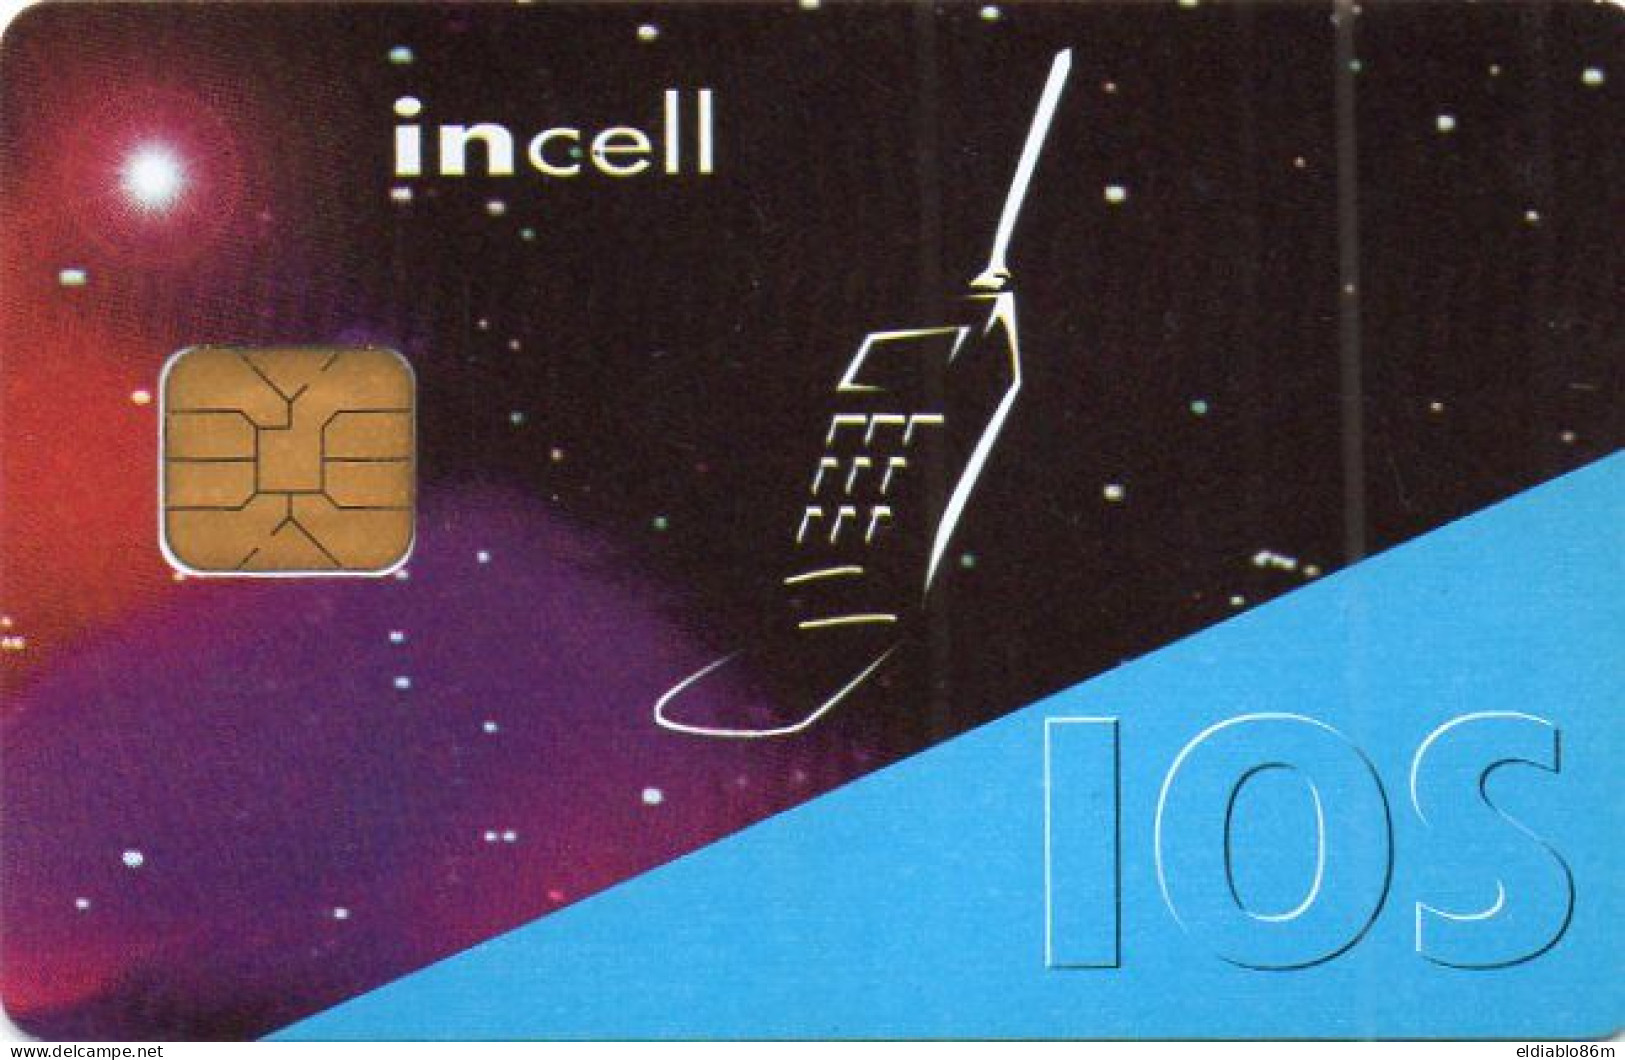 ITALY - CHIP CARD - TEST CARD - INCARD - INCELL IOS - SUBSCRIBER ID CARD BASIC - C&C 5509 - Tests & Service